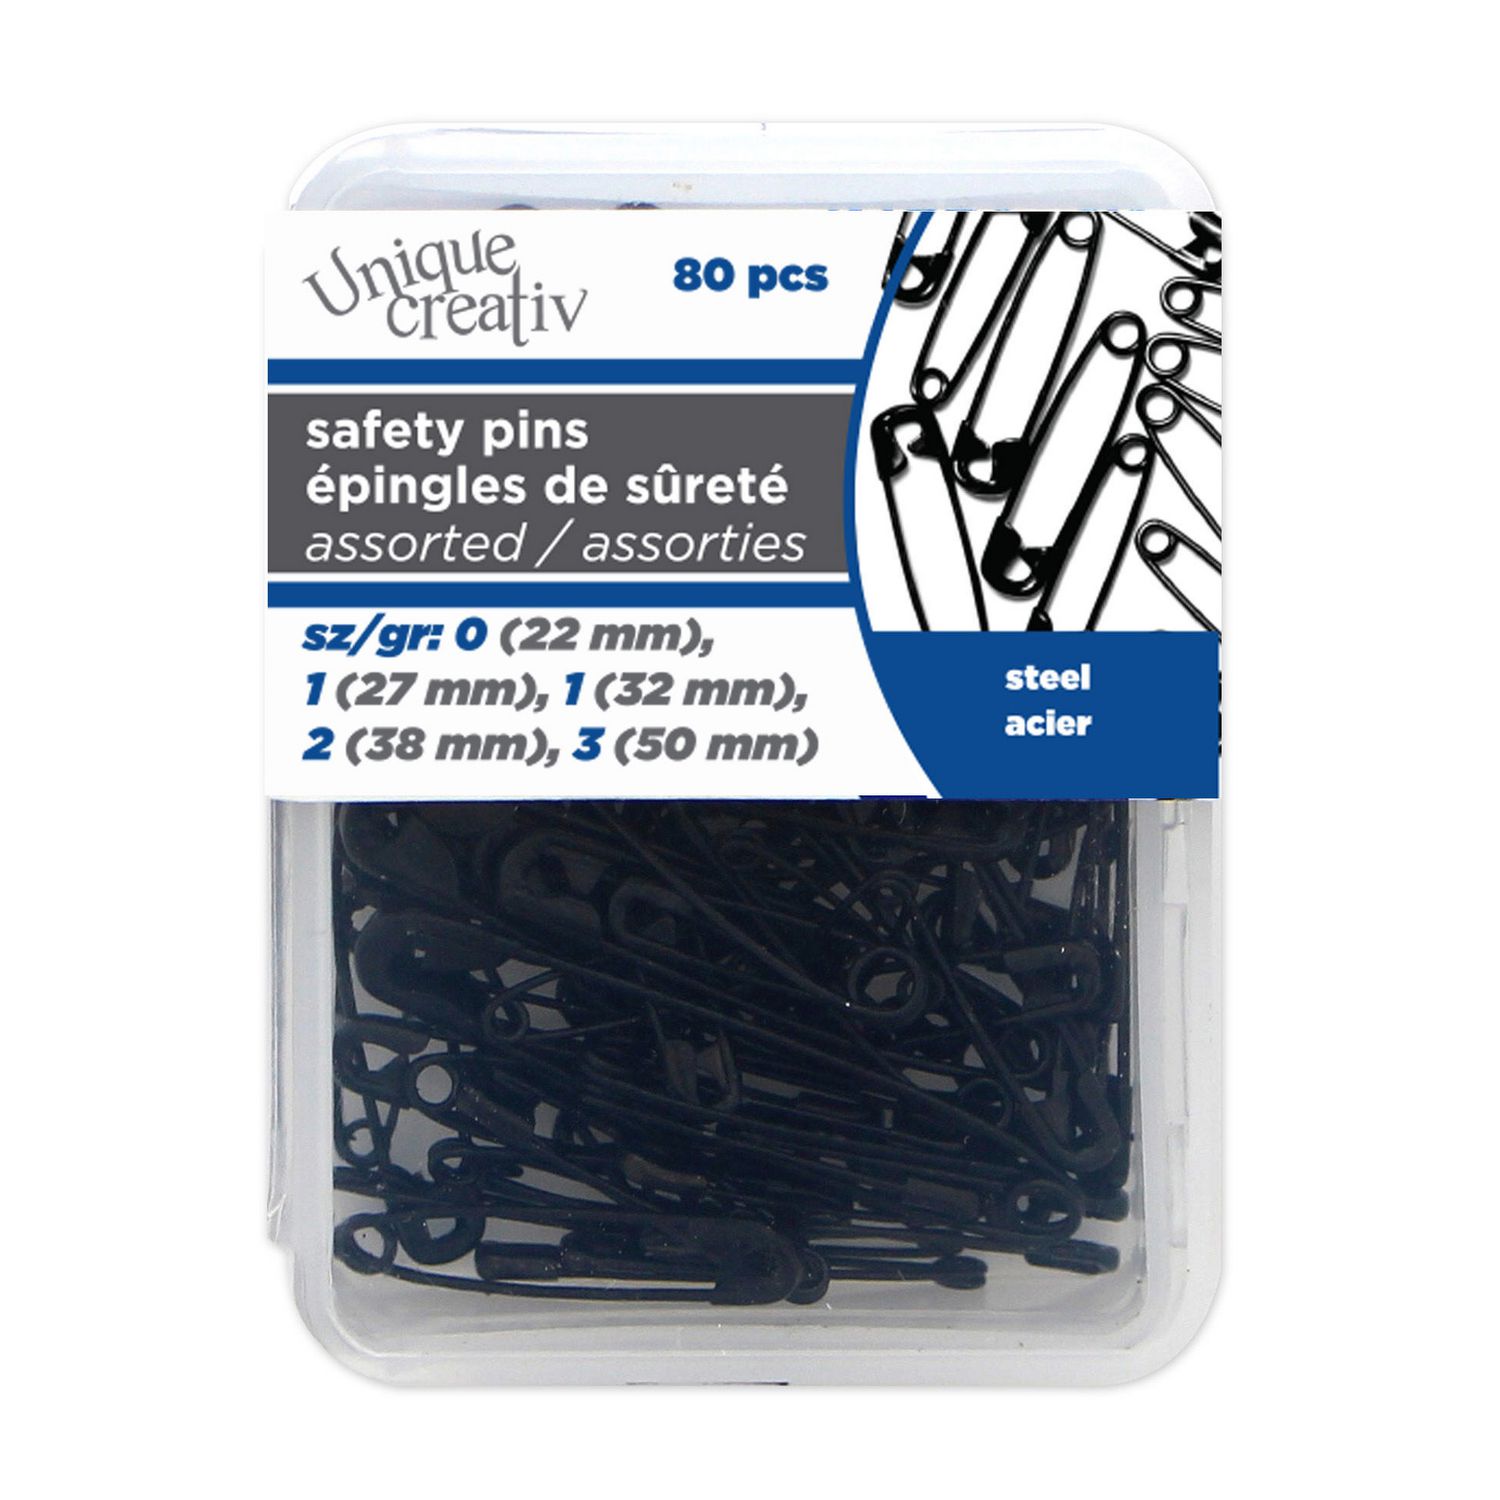 SINGER Safety Pins, Black & White, 2 Assorted Sizes, 25 Count 